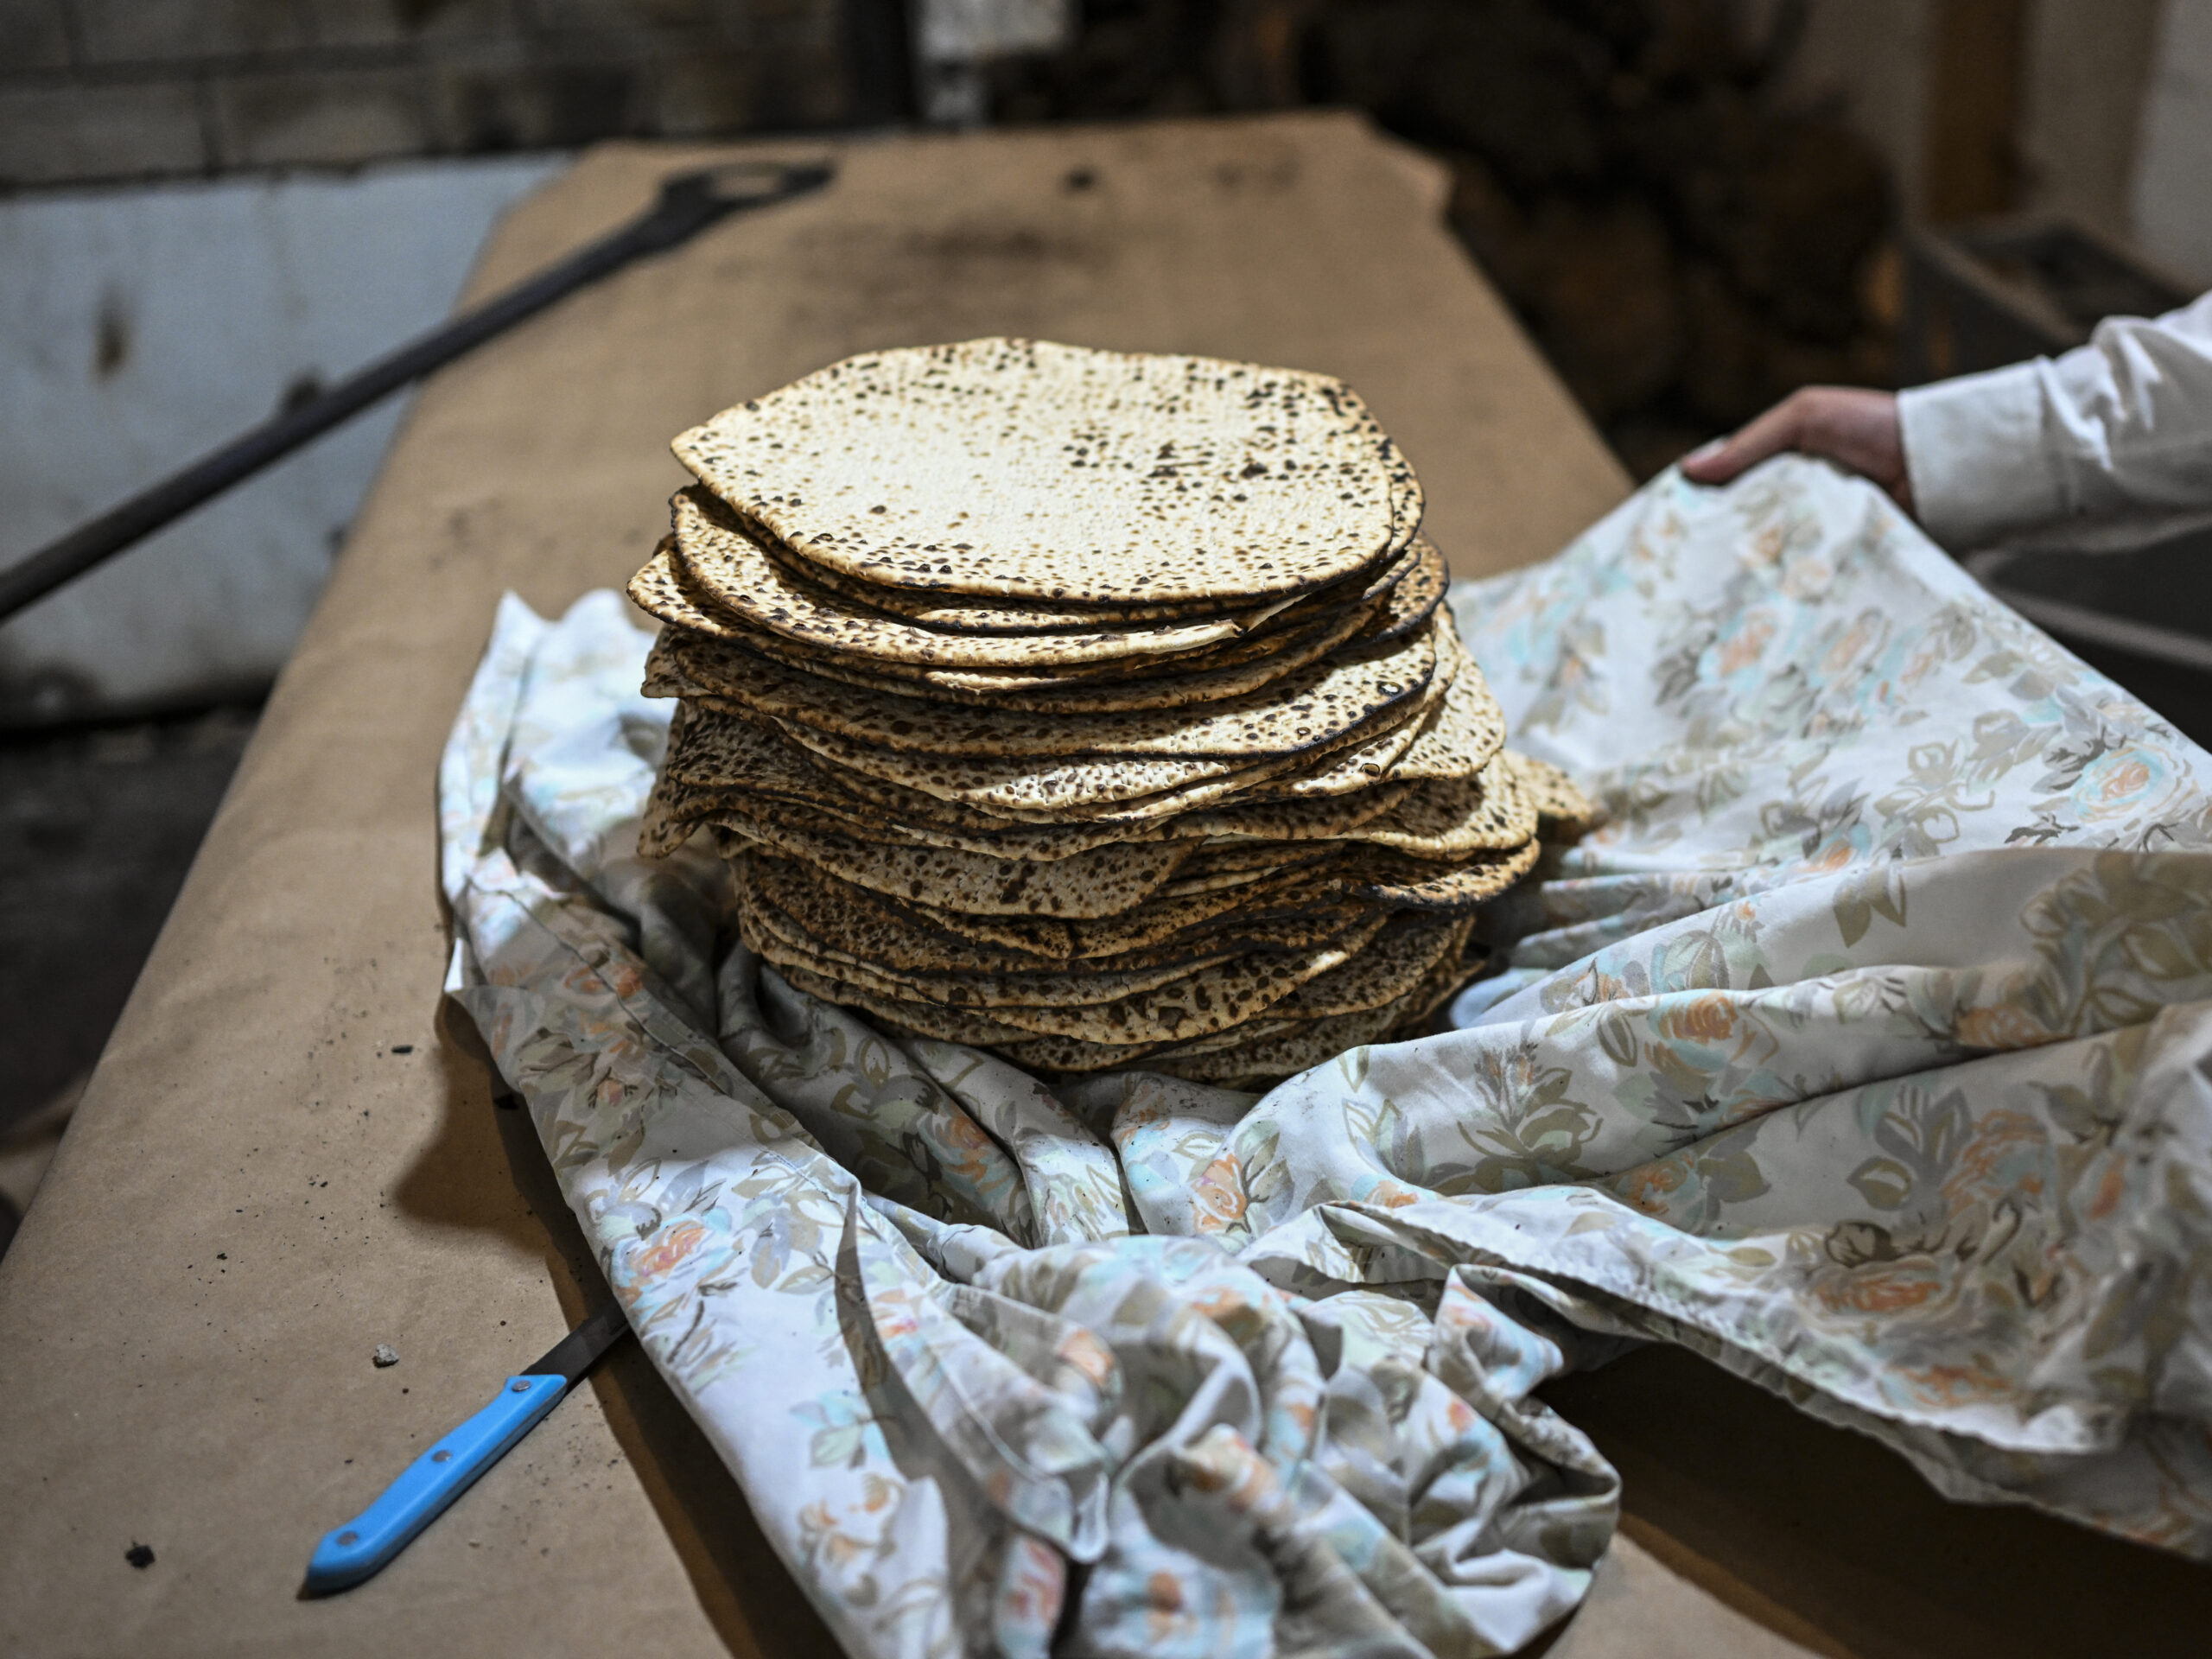 Like the Passover matzo, bread is a symbol of affliction and hope in today’s world